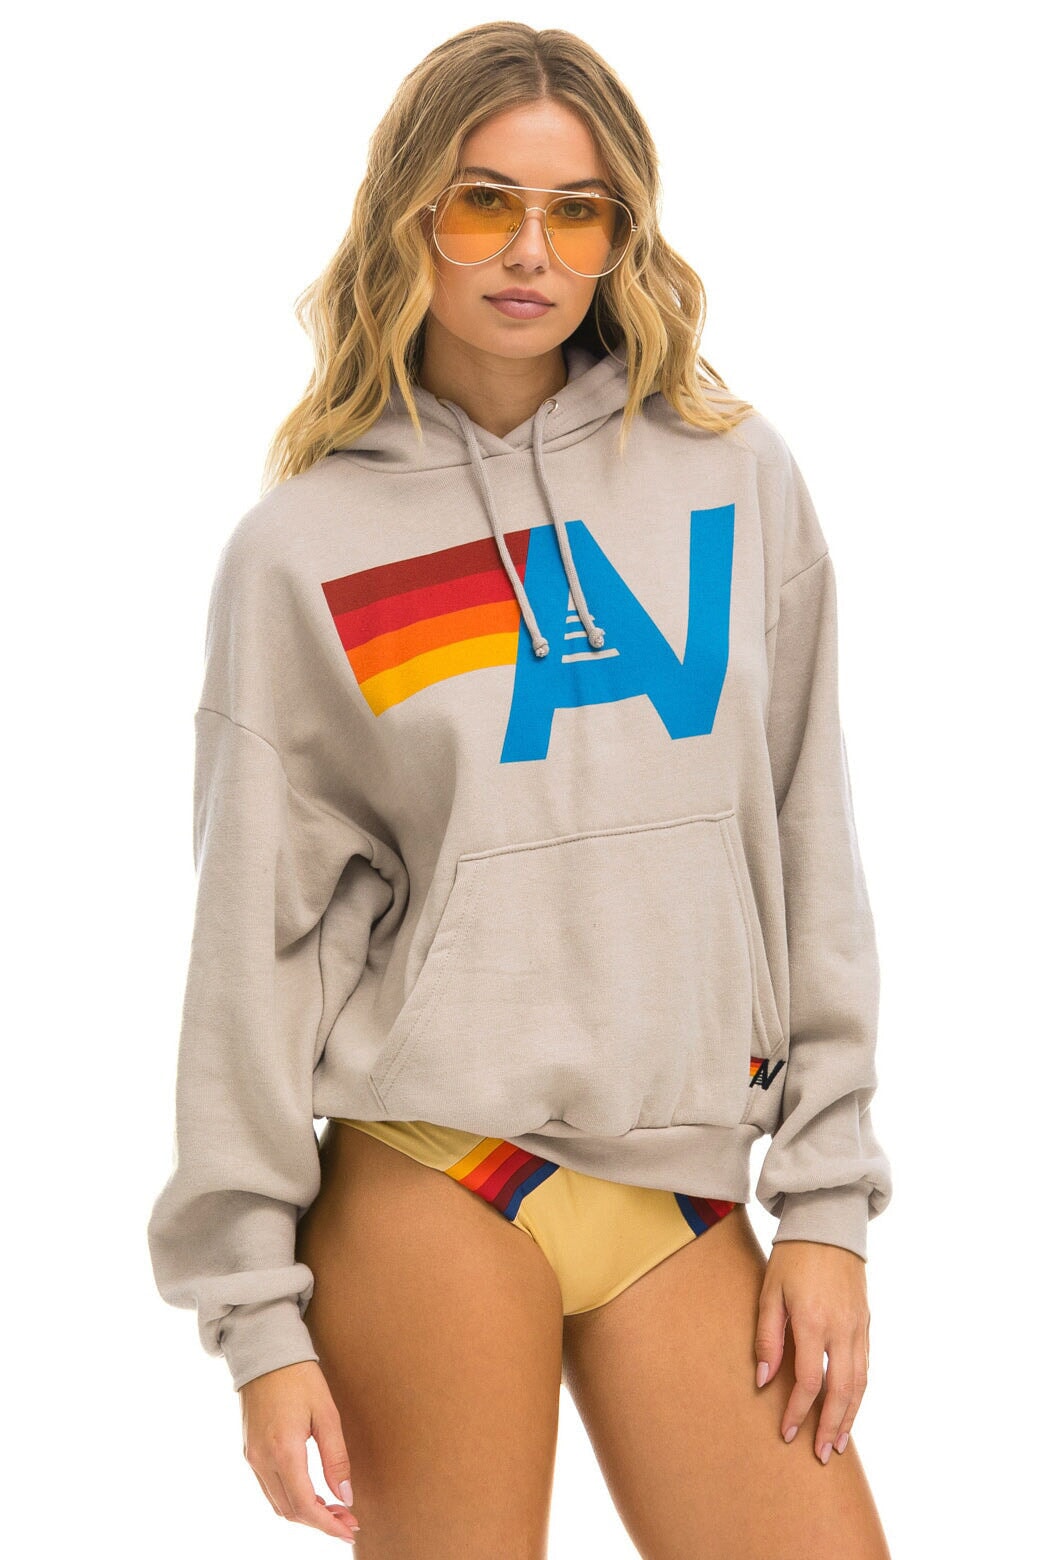 LOGO PULLOVER RELAXED HOODIE - SAND Hoodie Aviator Nation 